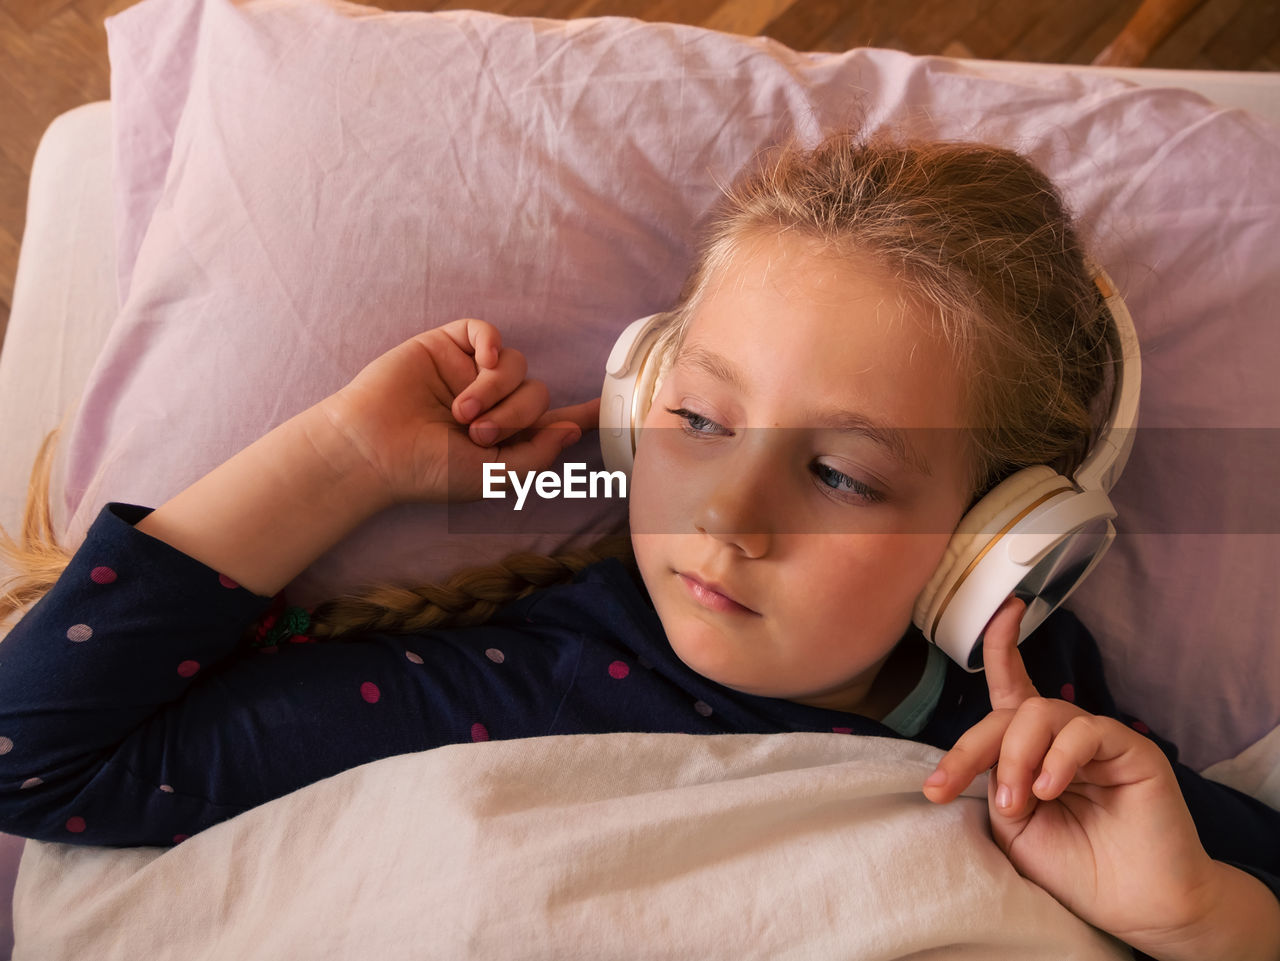 Child girl in headphones listens music for better sleep relaxing podcast stress relief in smartphone